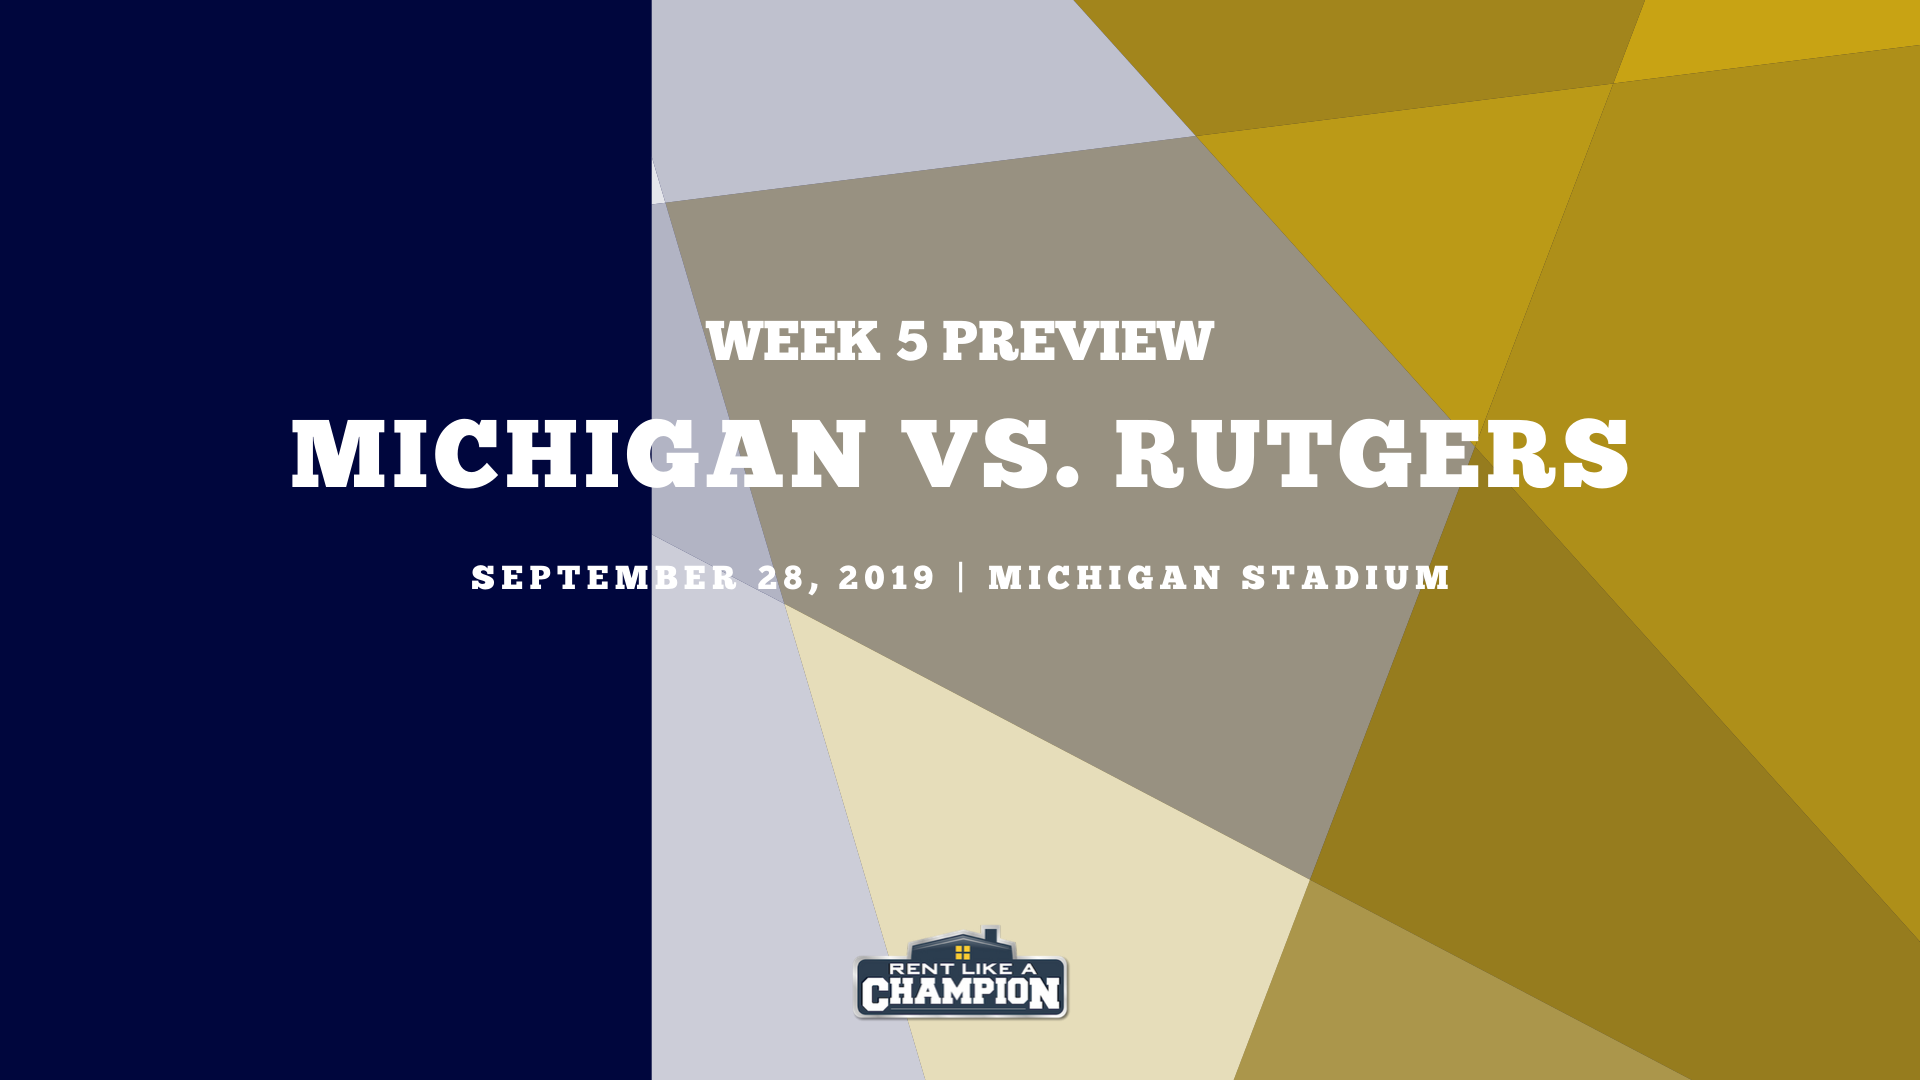 Michigan Game Preview Template (3)